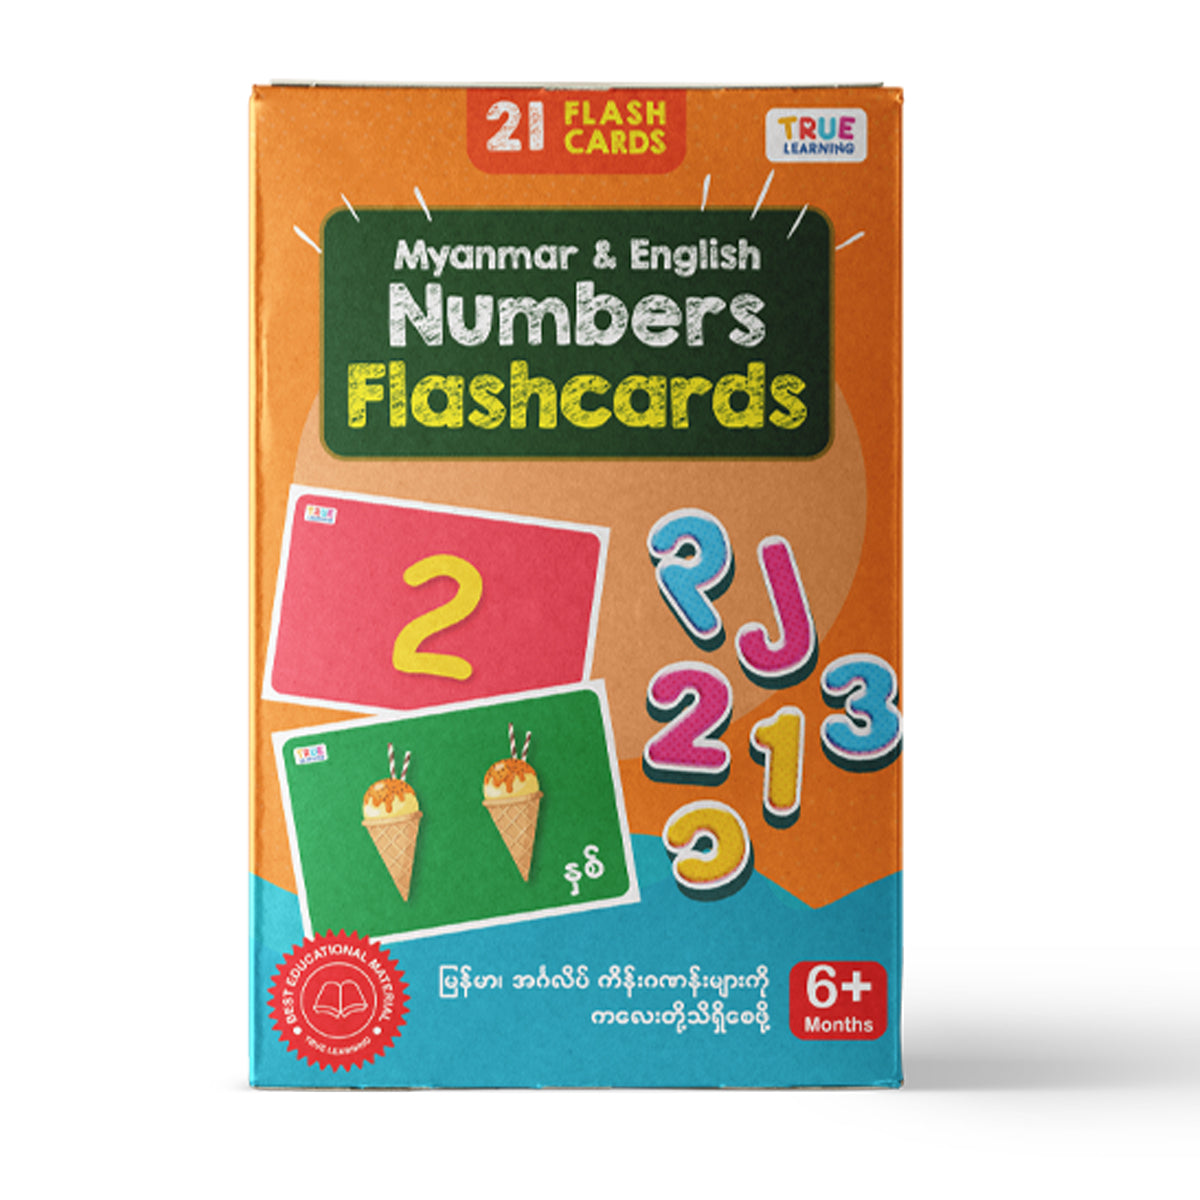 Myanmar & English Number Flashcards 21 cards